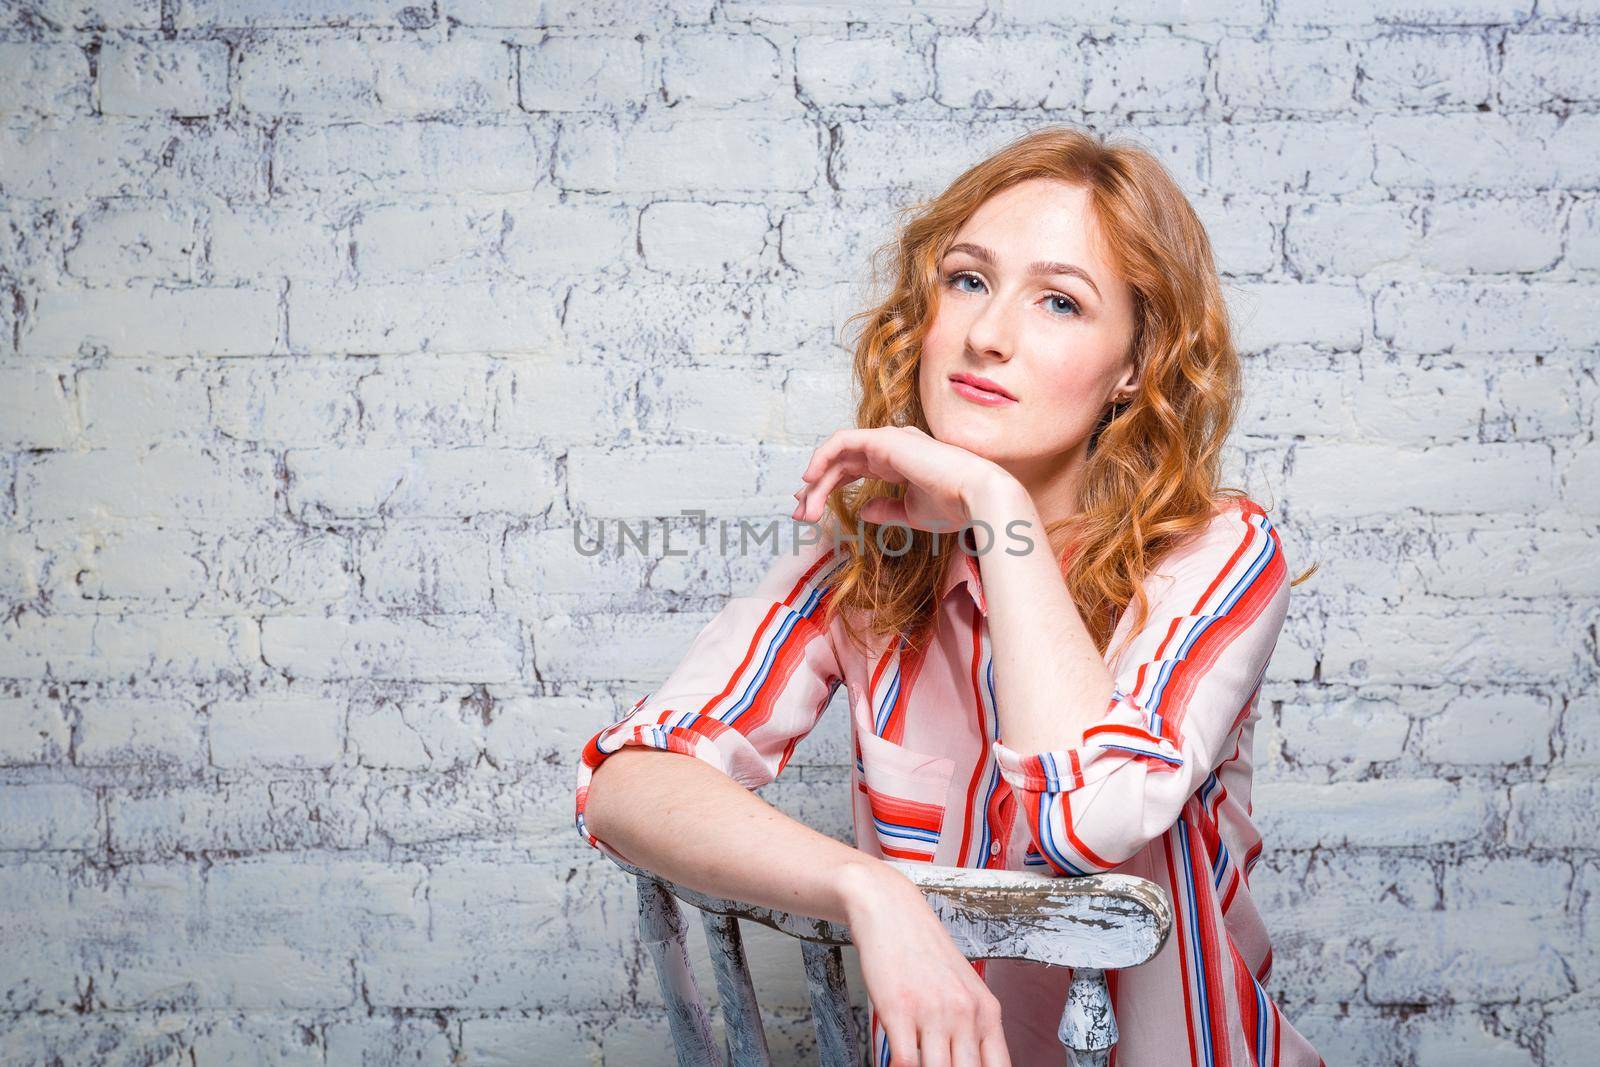 portrait Beautiful young woman student with red curly hair and freckles on her face sitting on a wooden chair on a brick wall background in gray. Dressed in a red striped shirt by Tomashevska